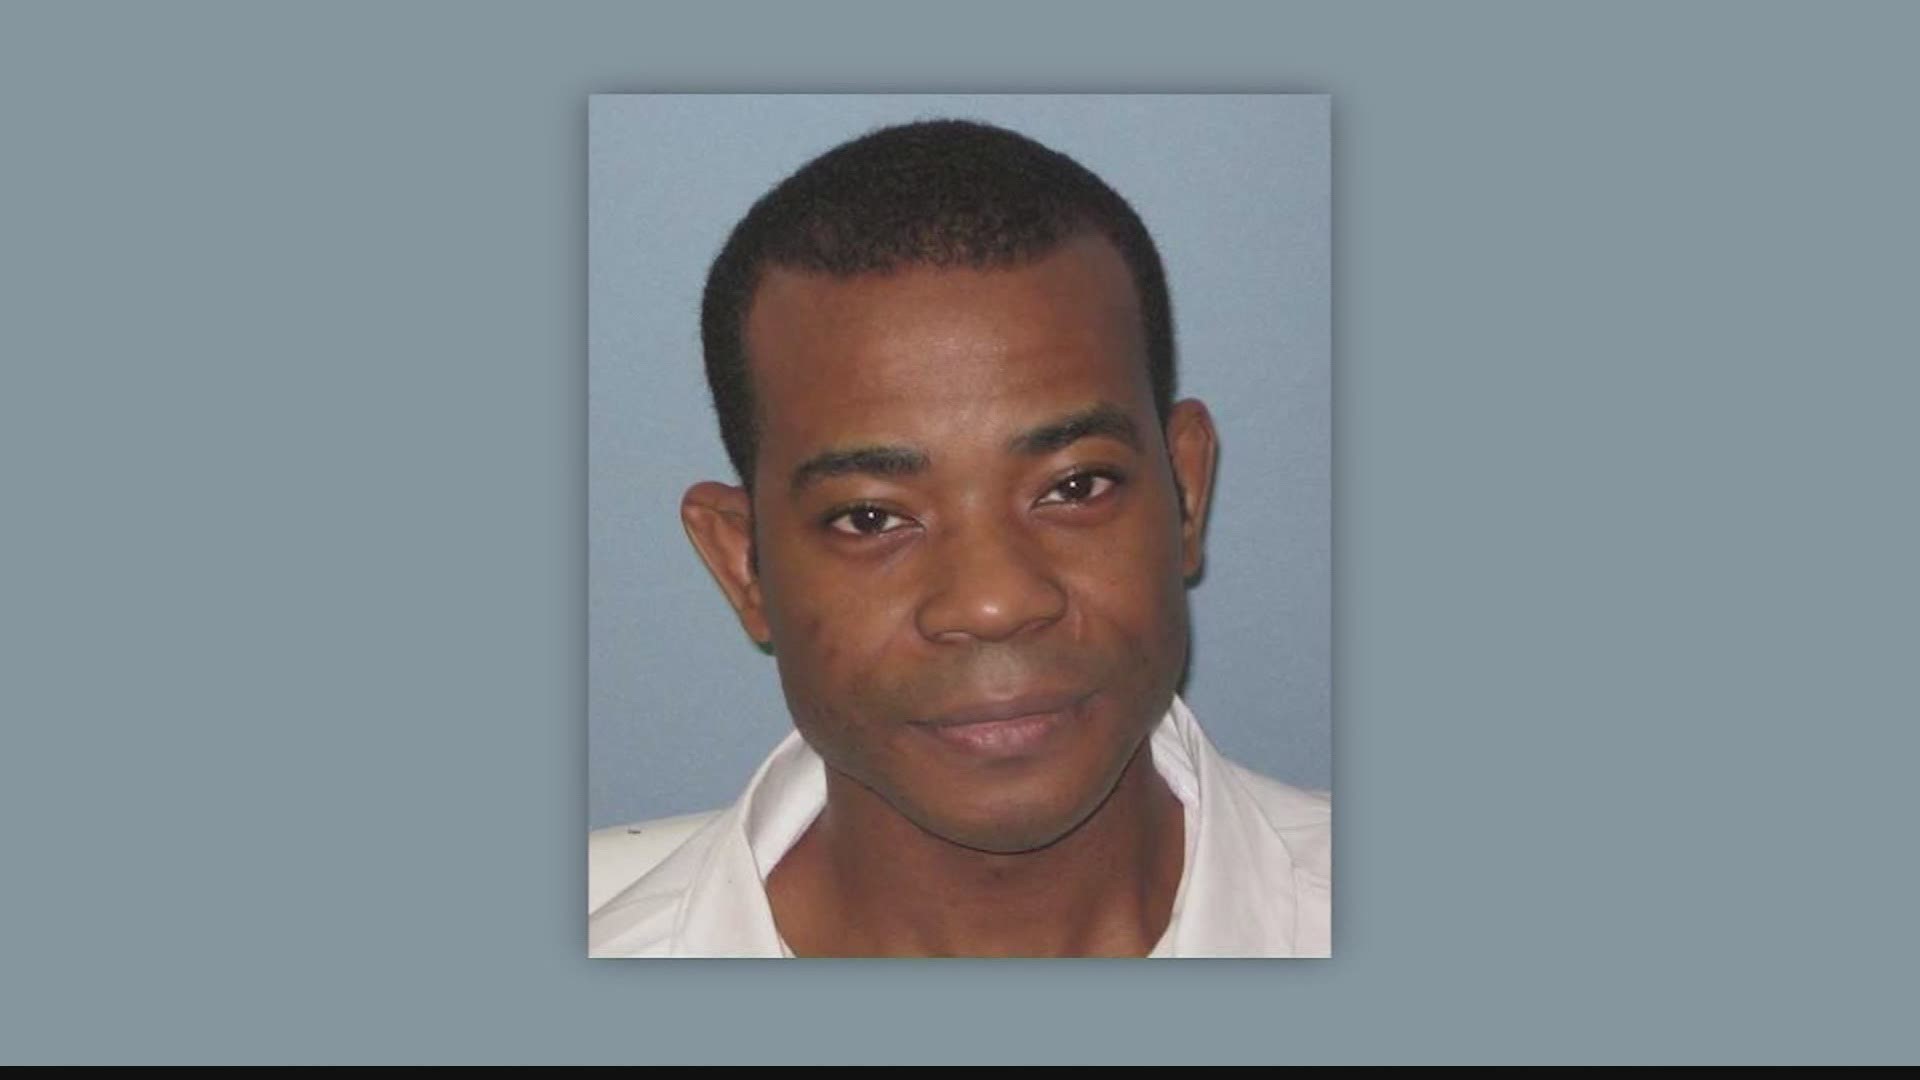 The US Supreme Court issued a temporary stay in the execution of Nathaniel Woods Thursday to allow time to review his request, but later denied his appeal.